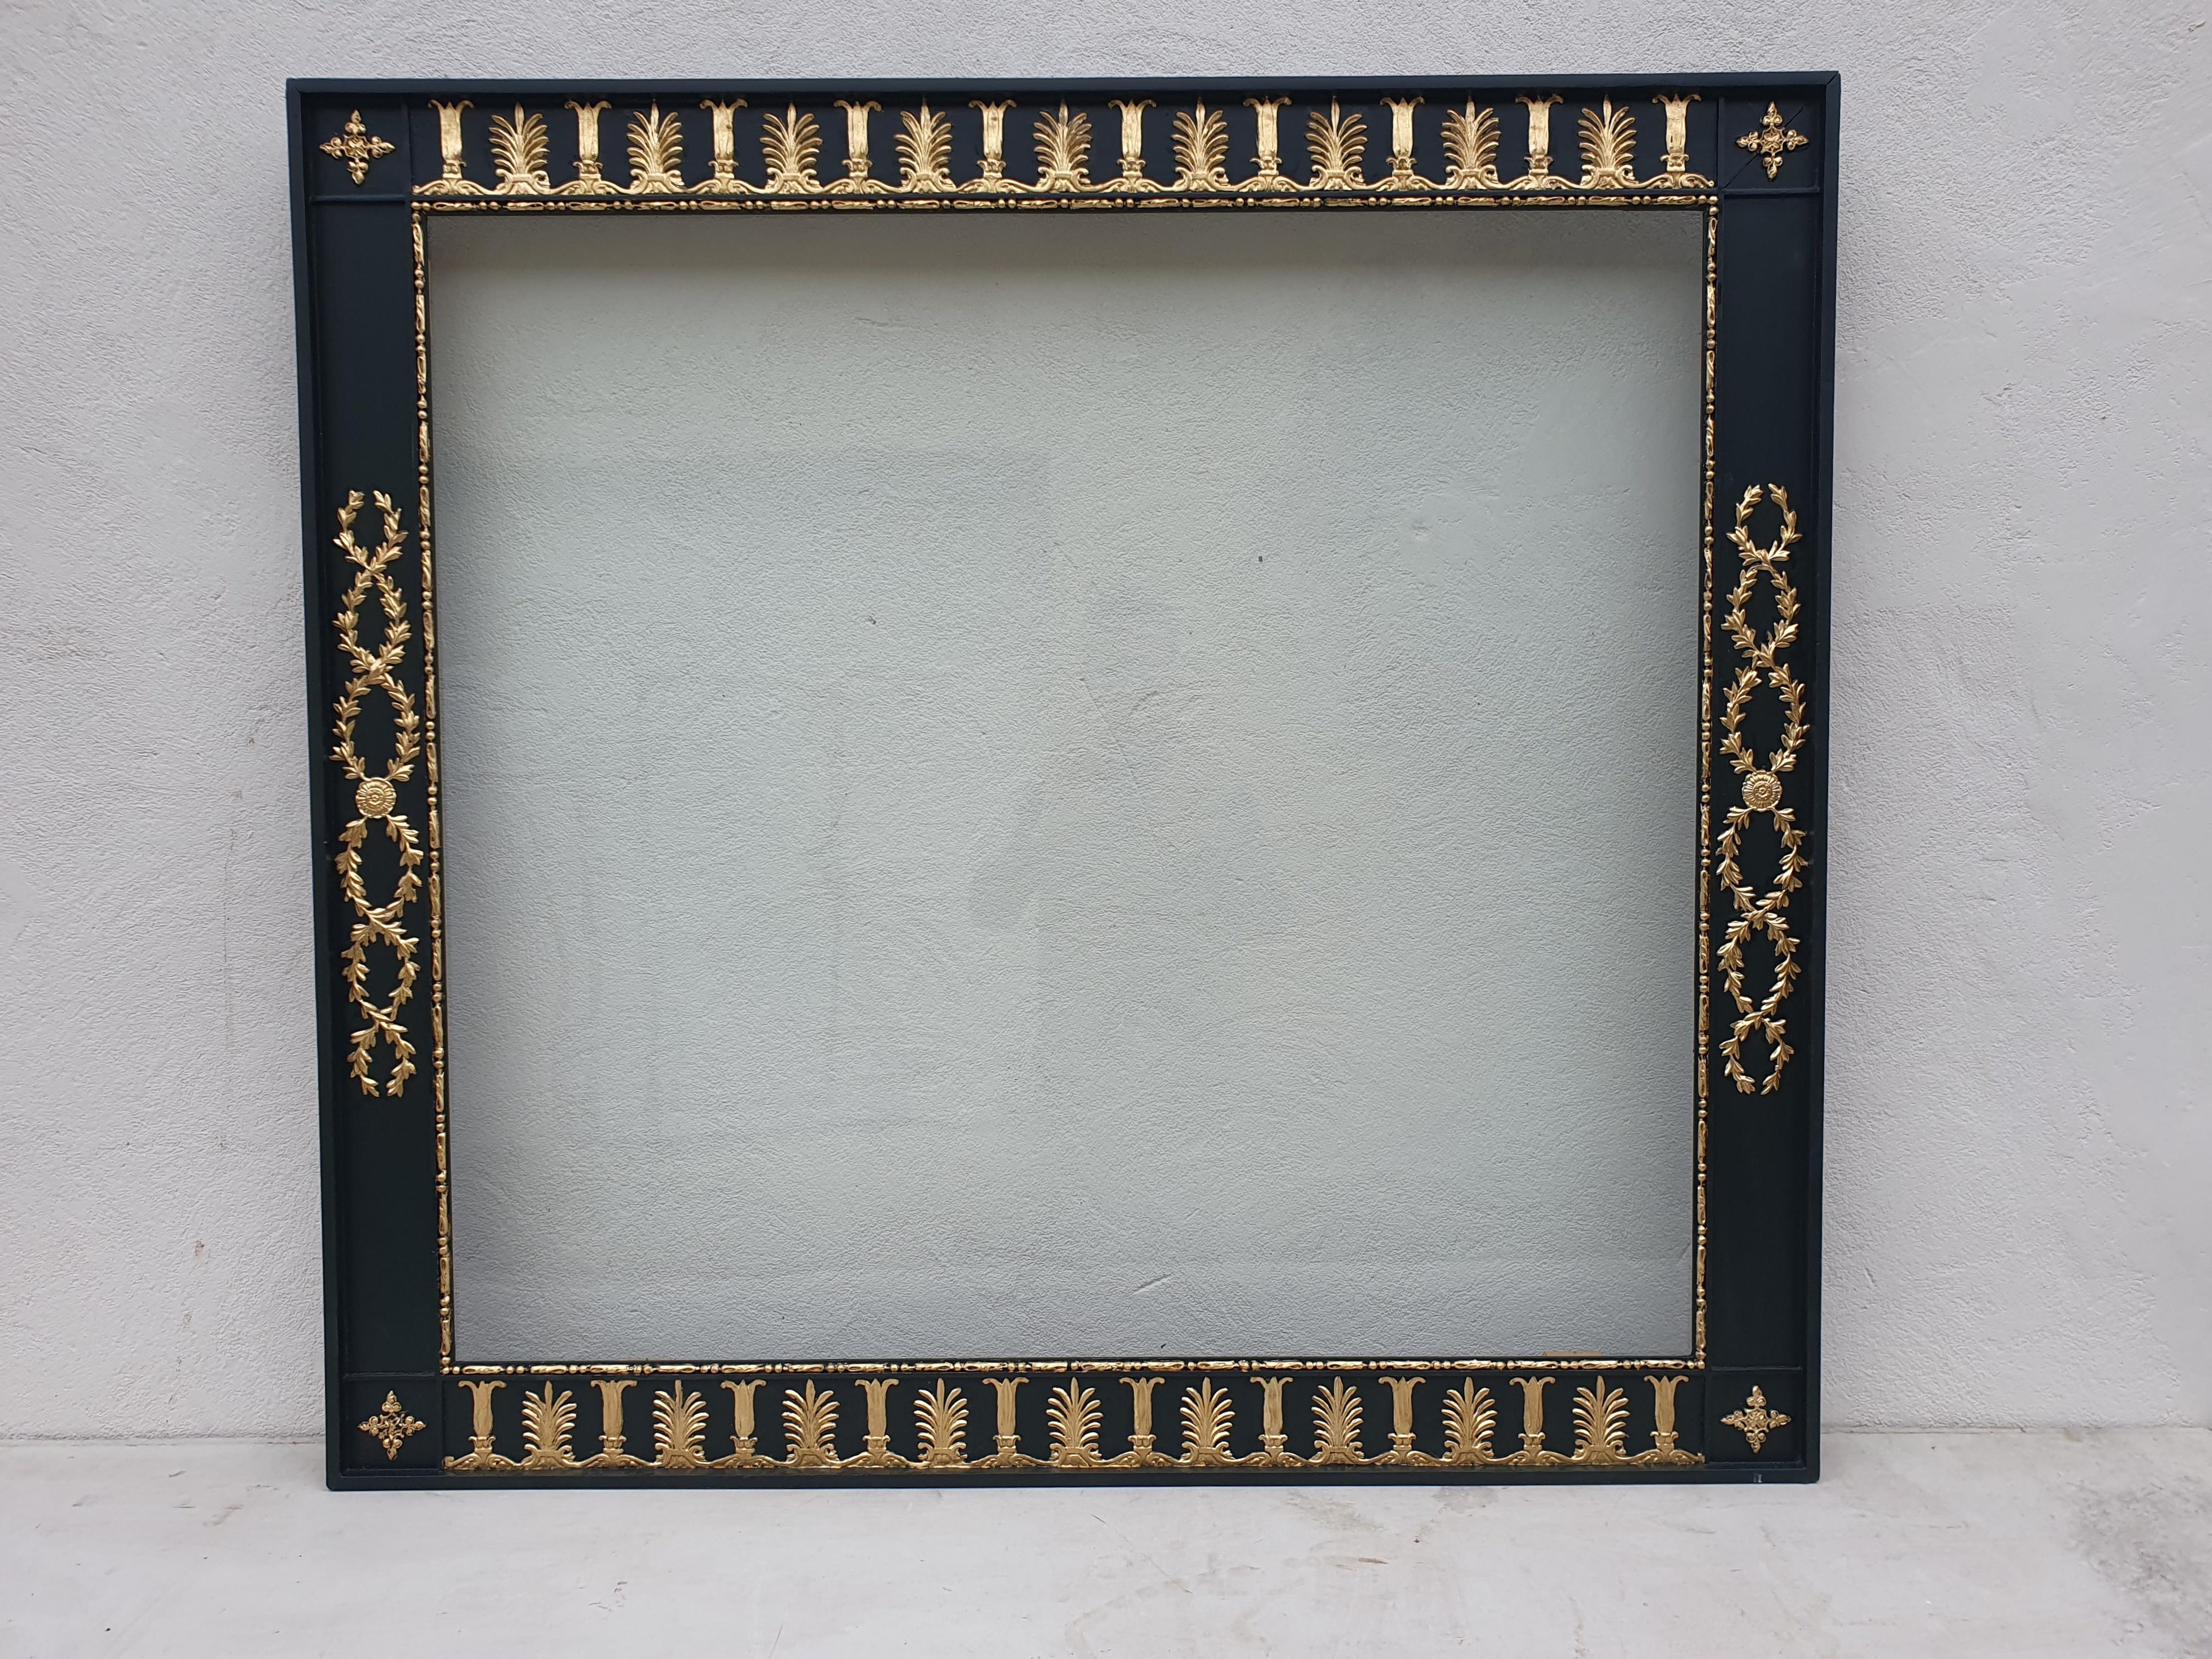 Rare Empire frame in green lacquered stuccoed wood and ornaments retouched with fine gold.
With its original glass.
Ideal for framing a prestigious engraving or Empire pastel.

Work from the first half of the 19th century.

Very good